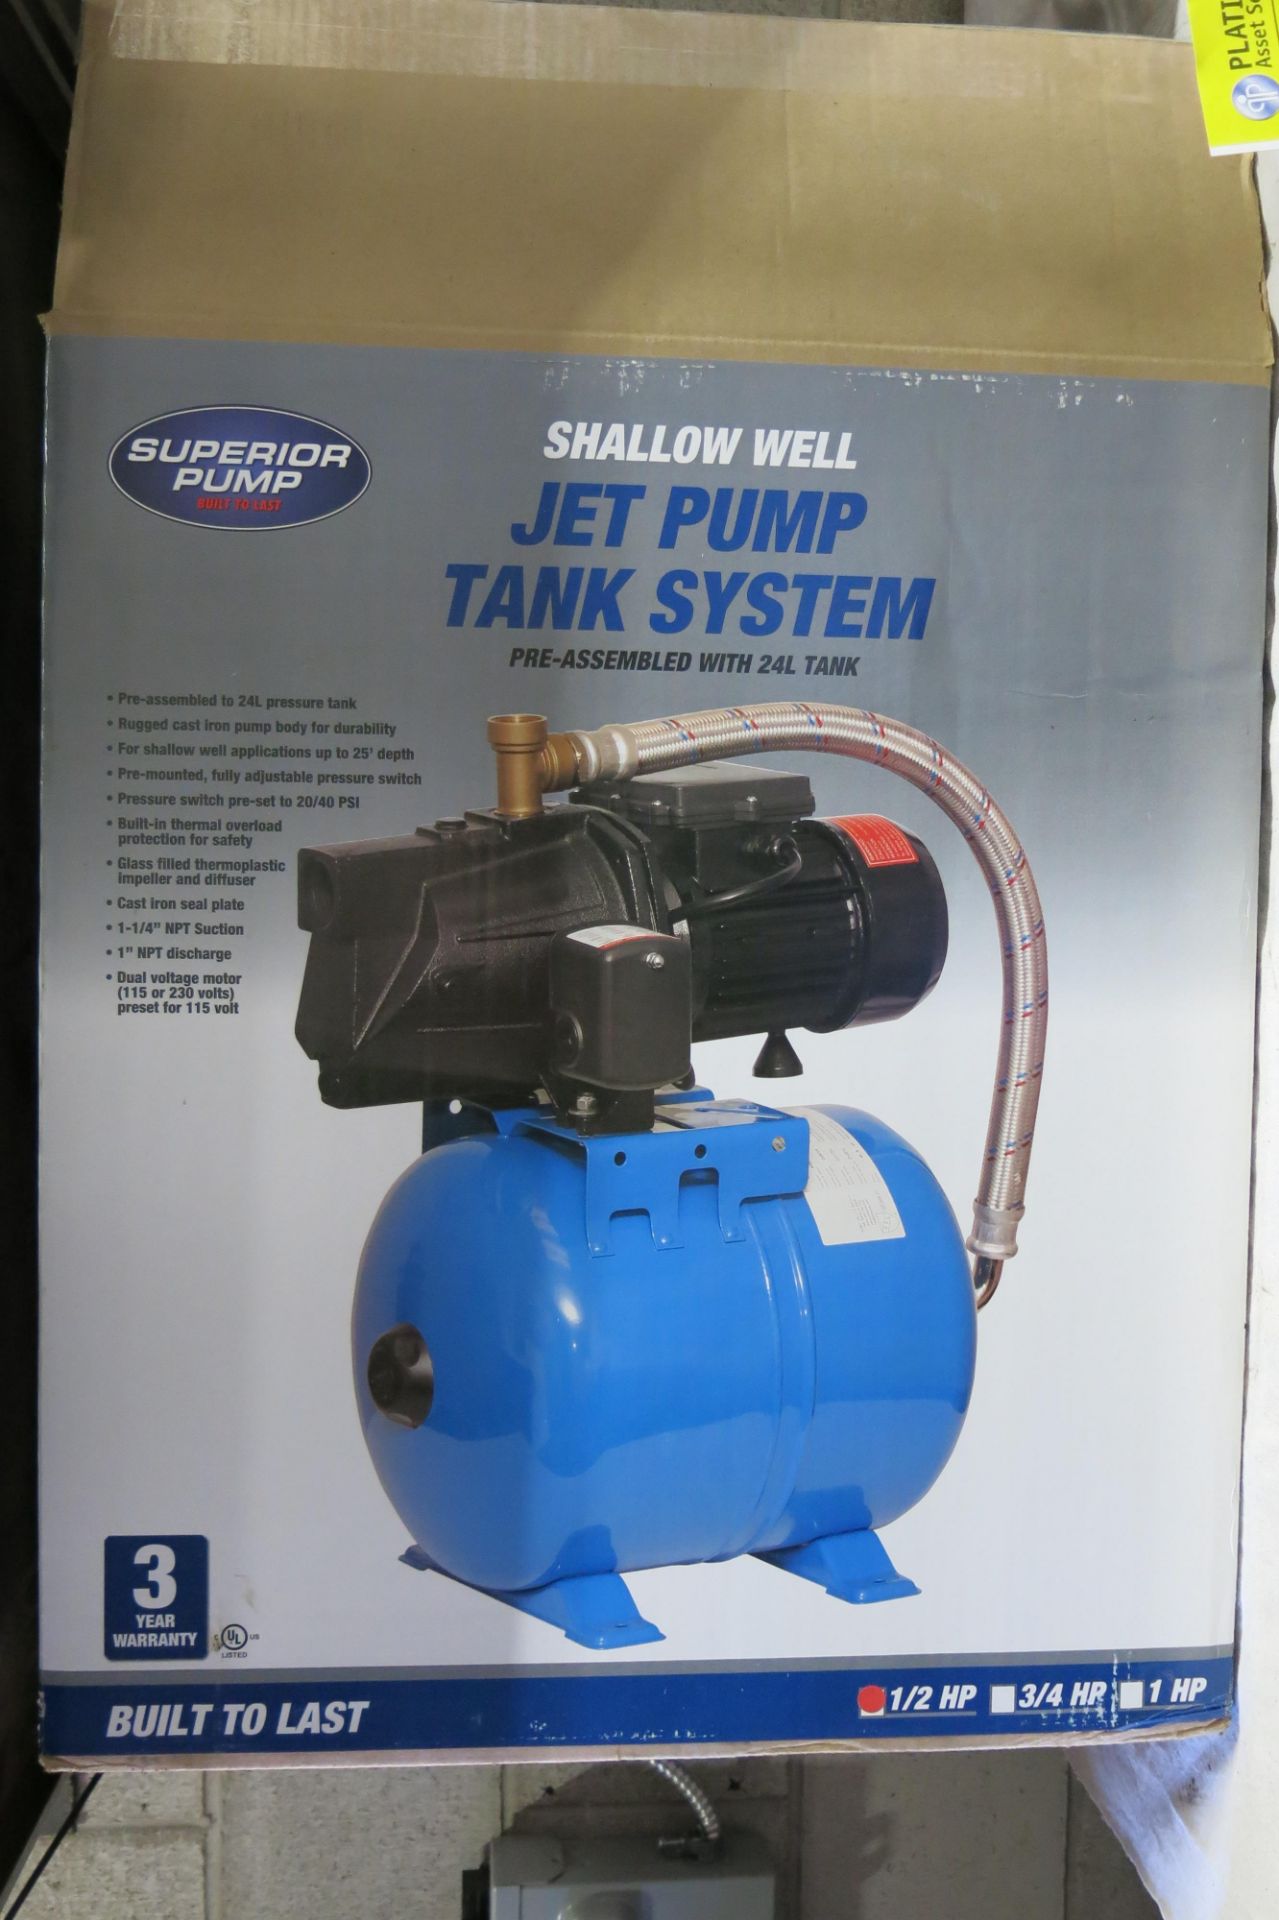 SUPERIOR PUMP, 24 LITRE, SHALLOW WELL JET PUMP TANK SYSTEM -NEW (LOCATED IN MISSISSAUGA) - Image 2 of 4